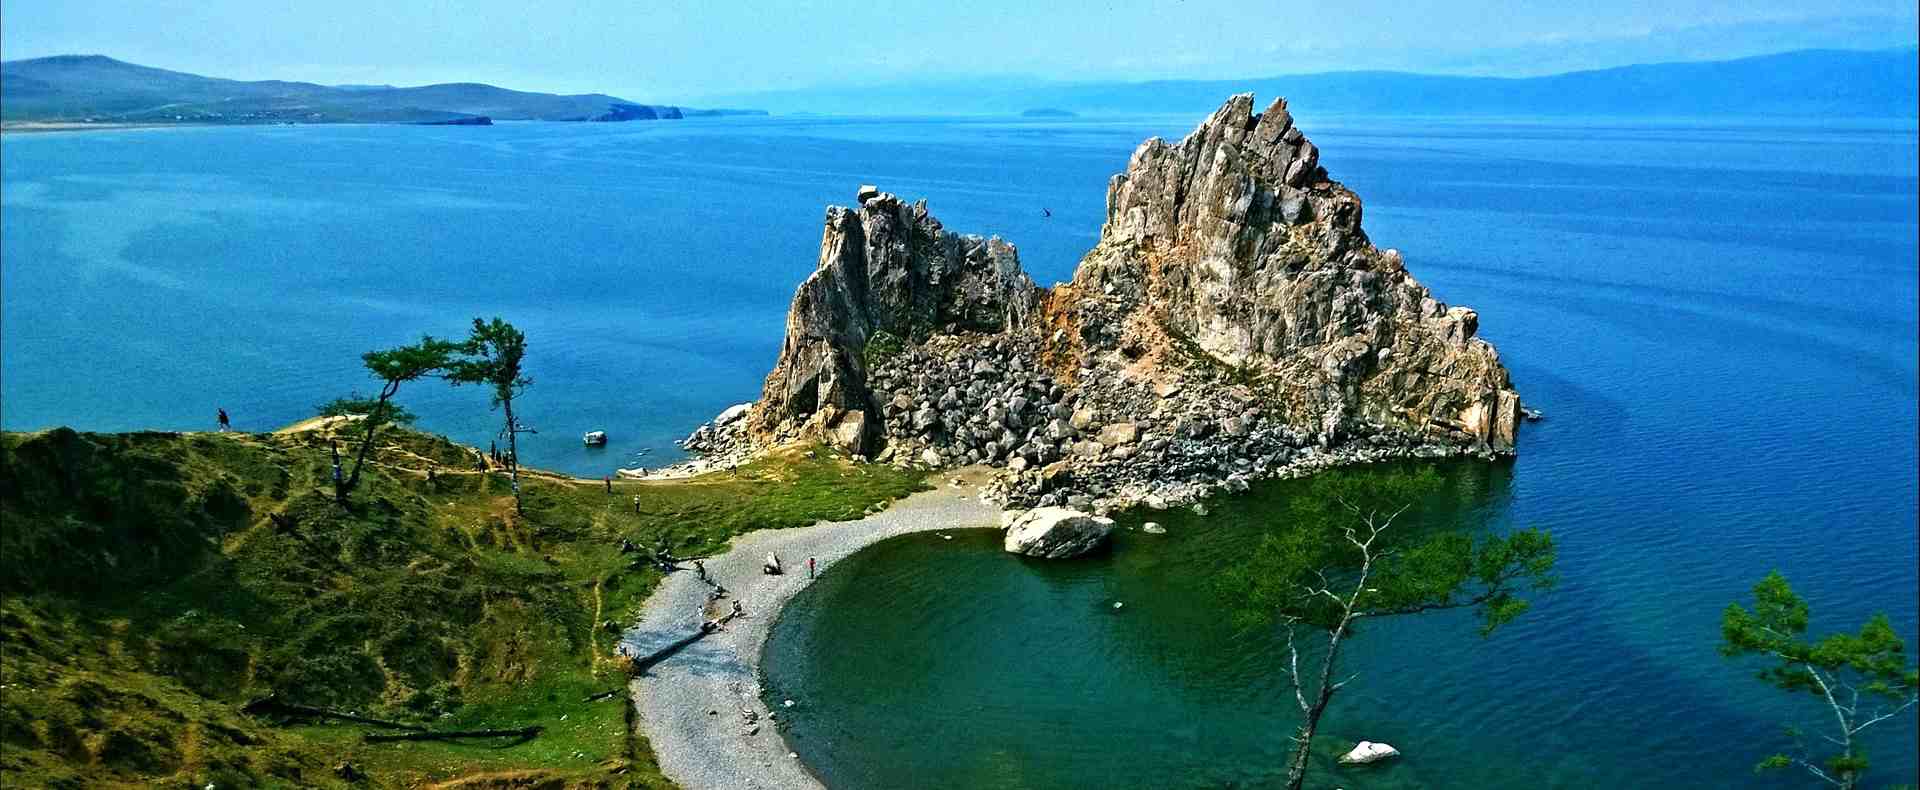 Lake Baikal in Russia | Location, Depth & Facts | Travel Guide